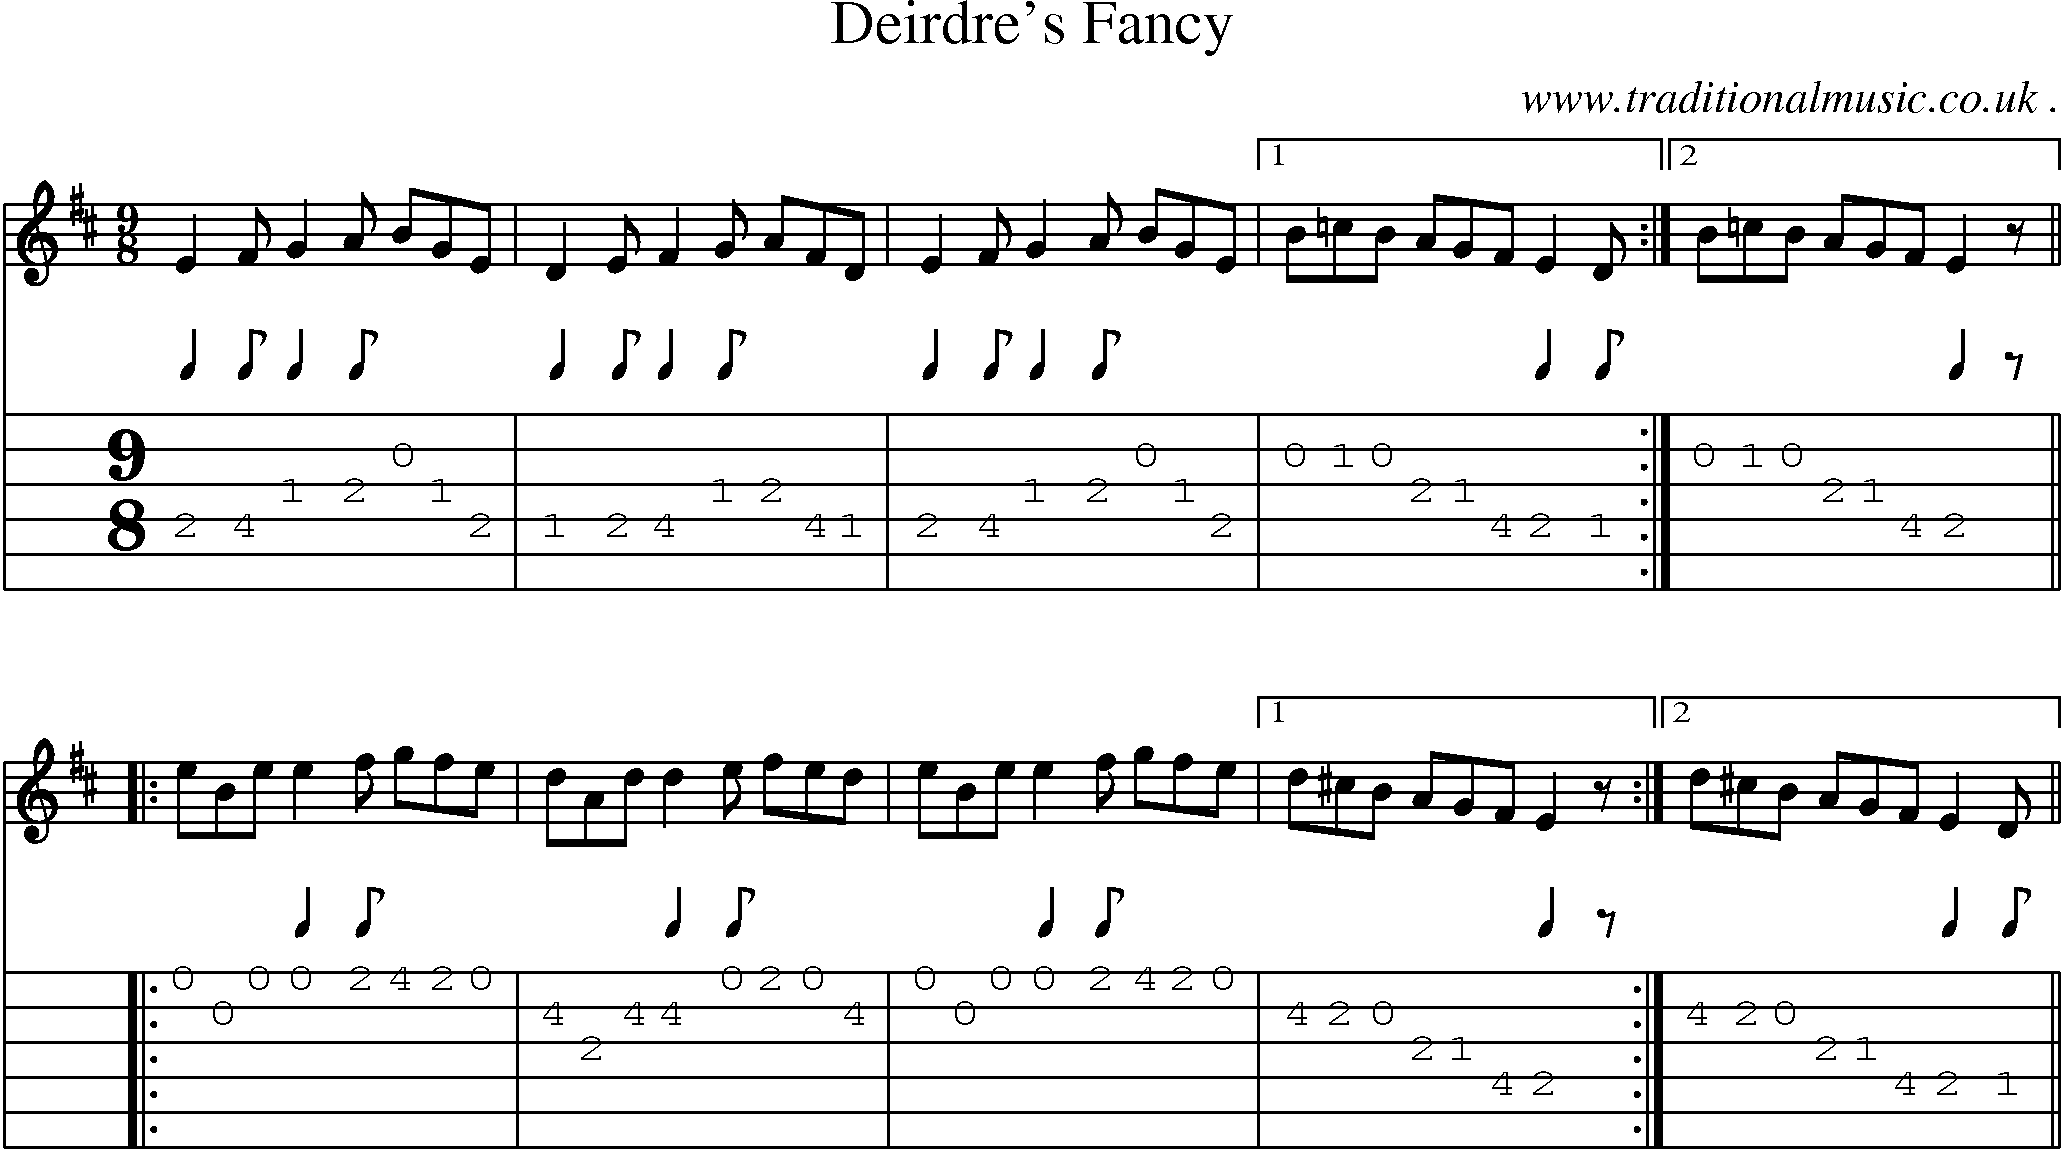 Sheet-Music and Guitar Tabs for Deirdres Fancy